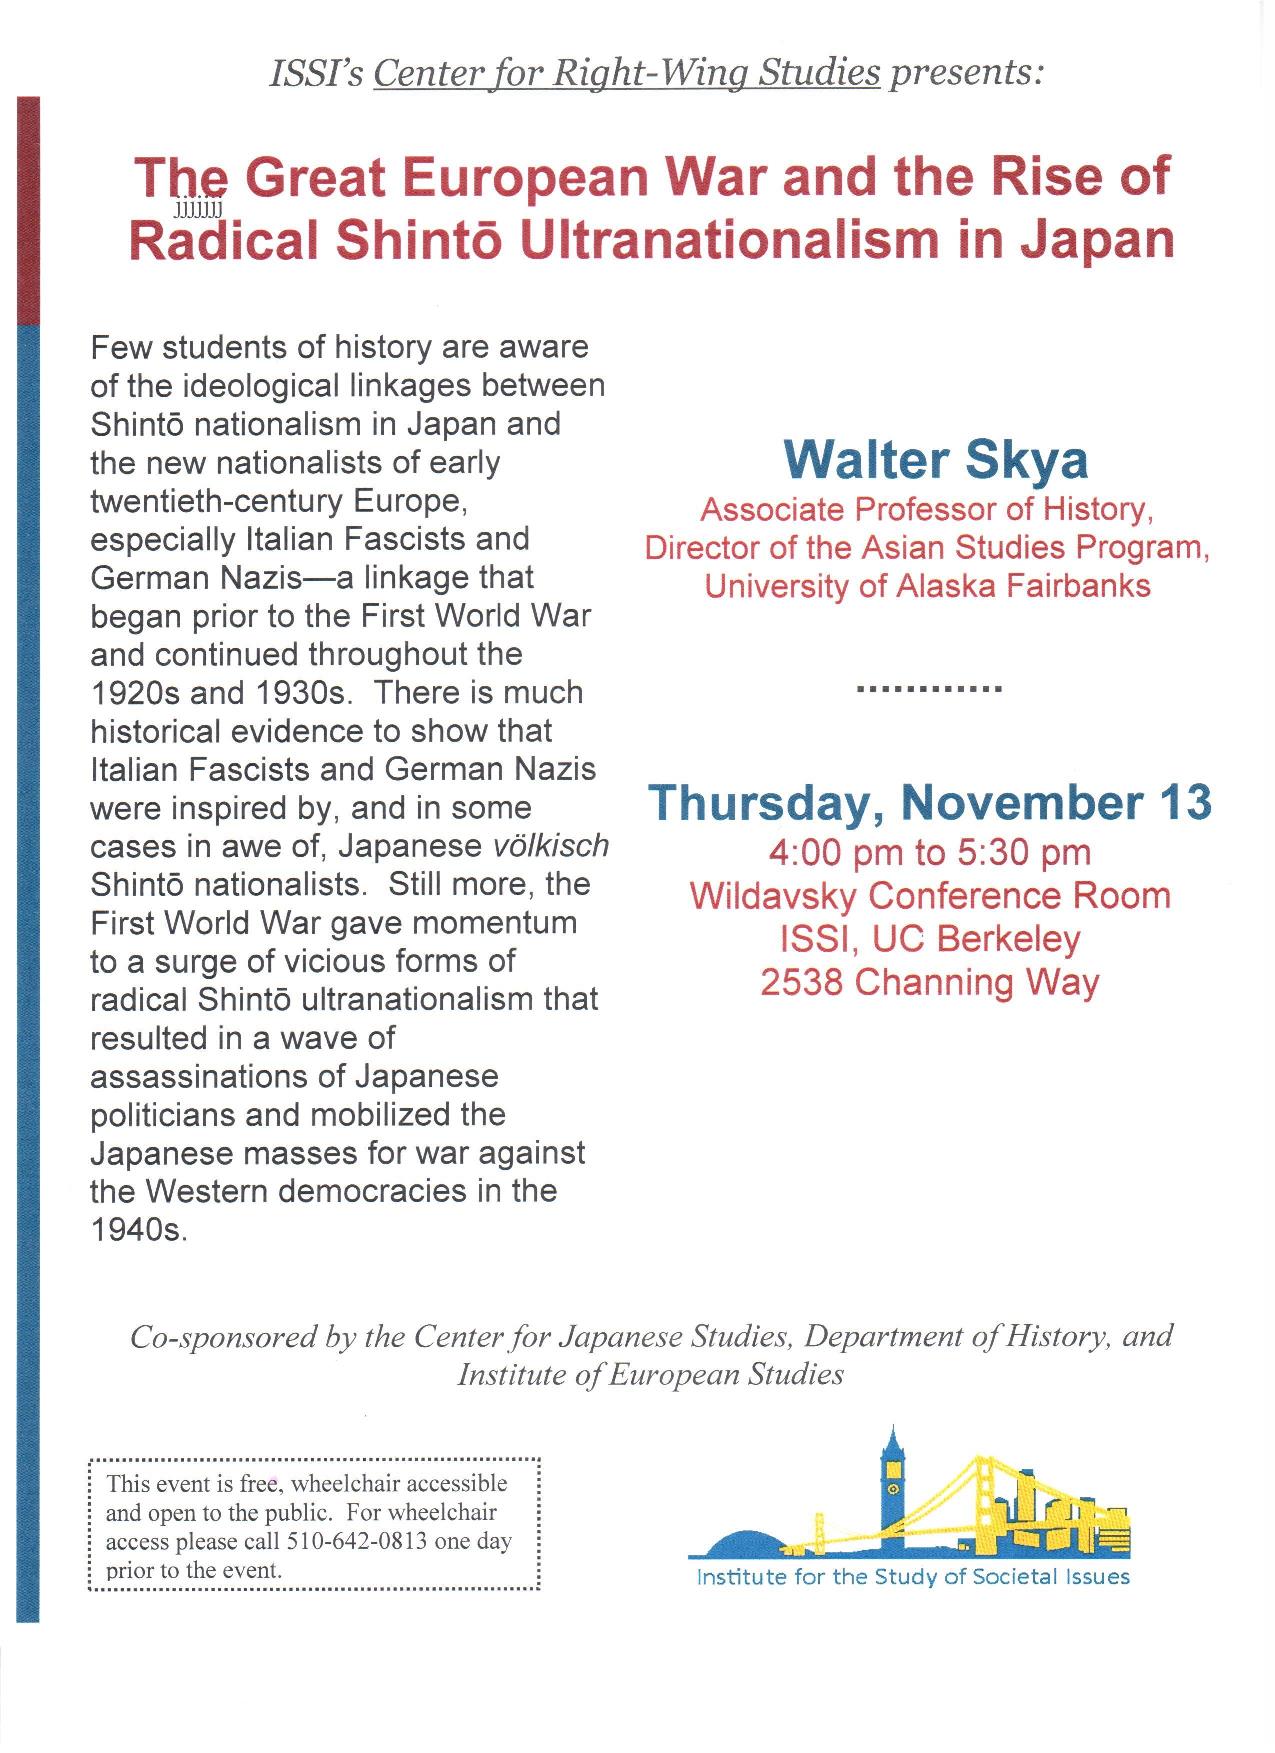 Flyer for free public lecture by Dr. Skya - The Great European War and the Rise of Radical Shinto Ultranationalism in Japan